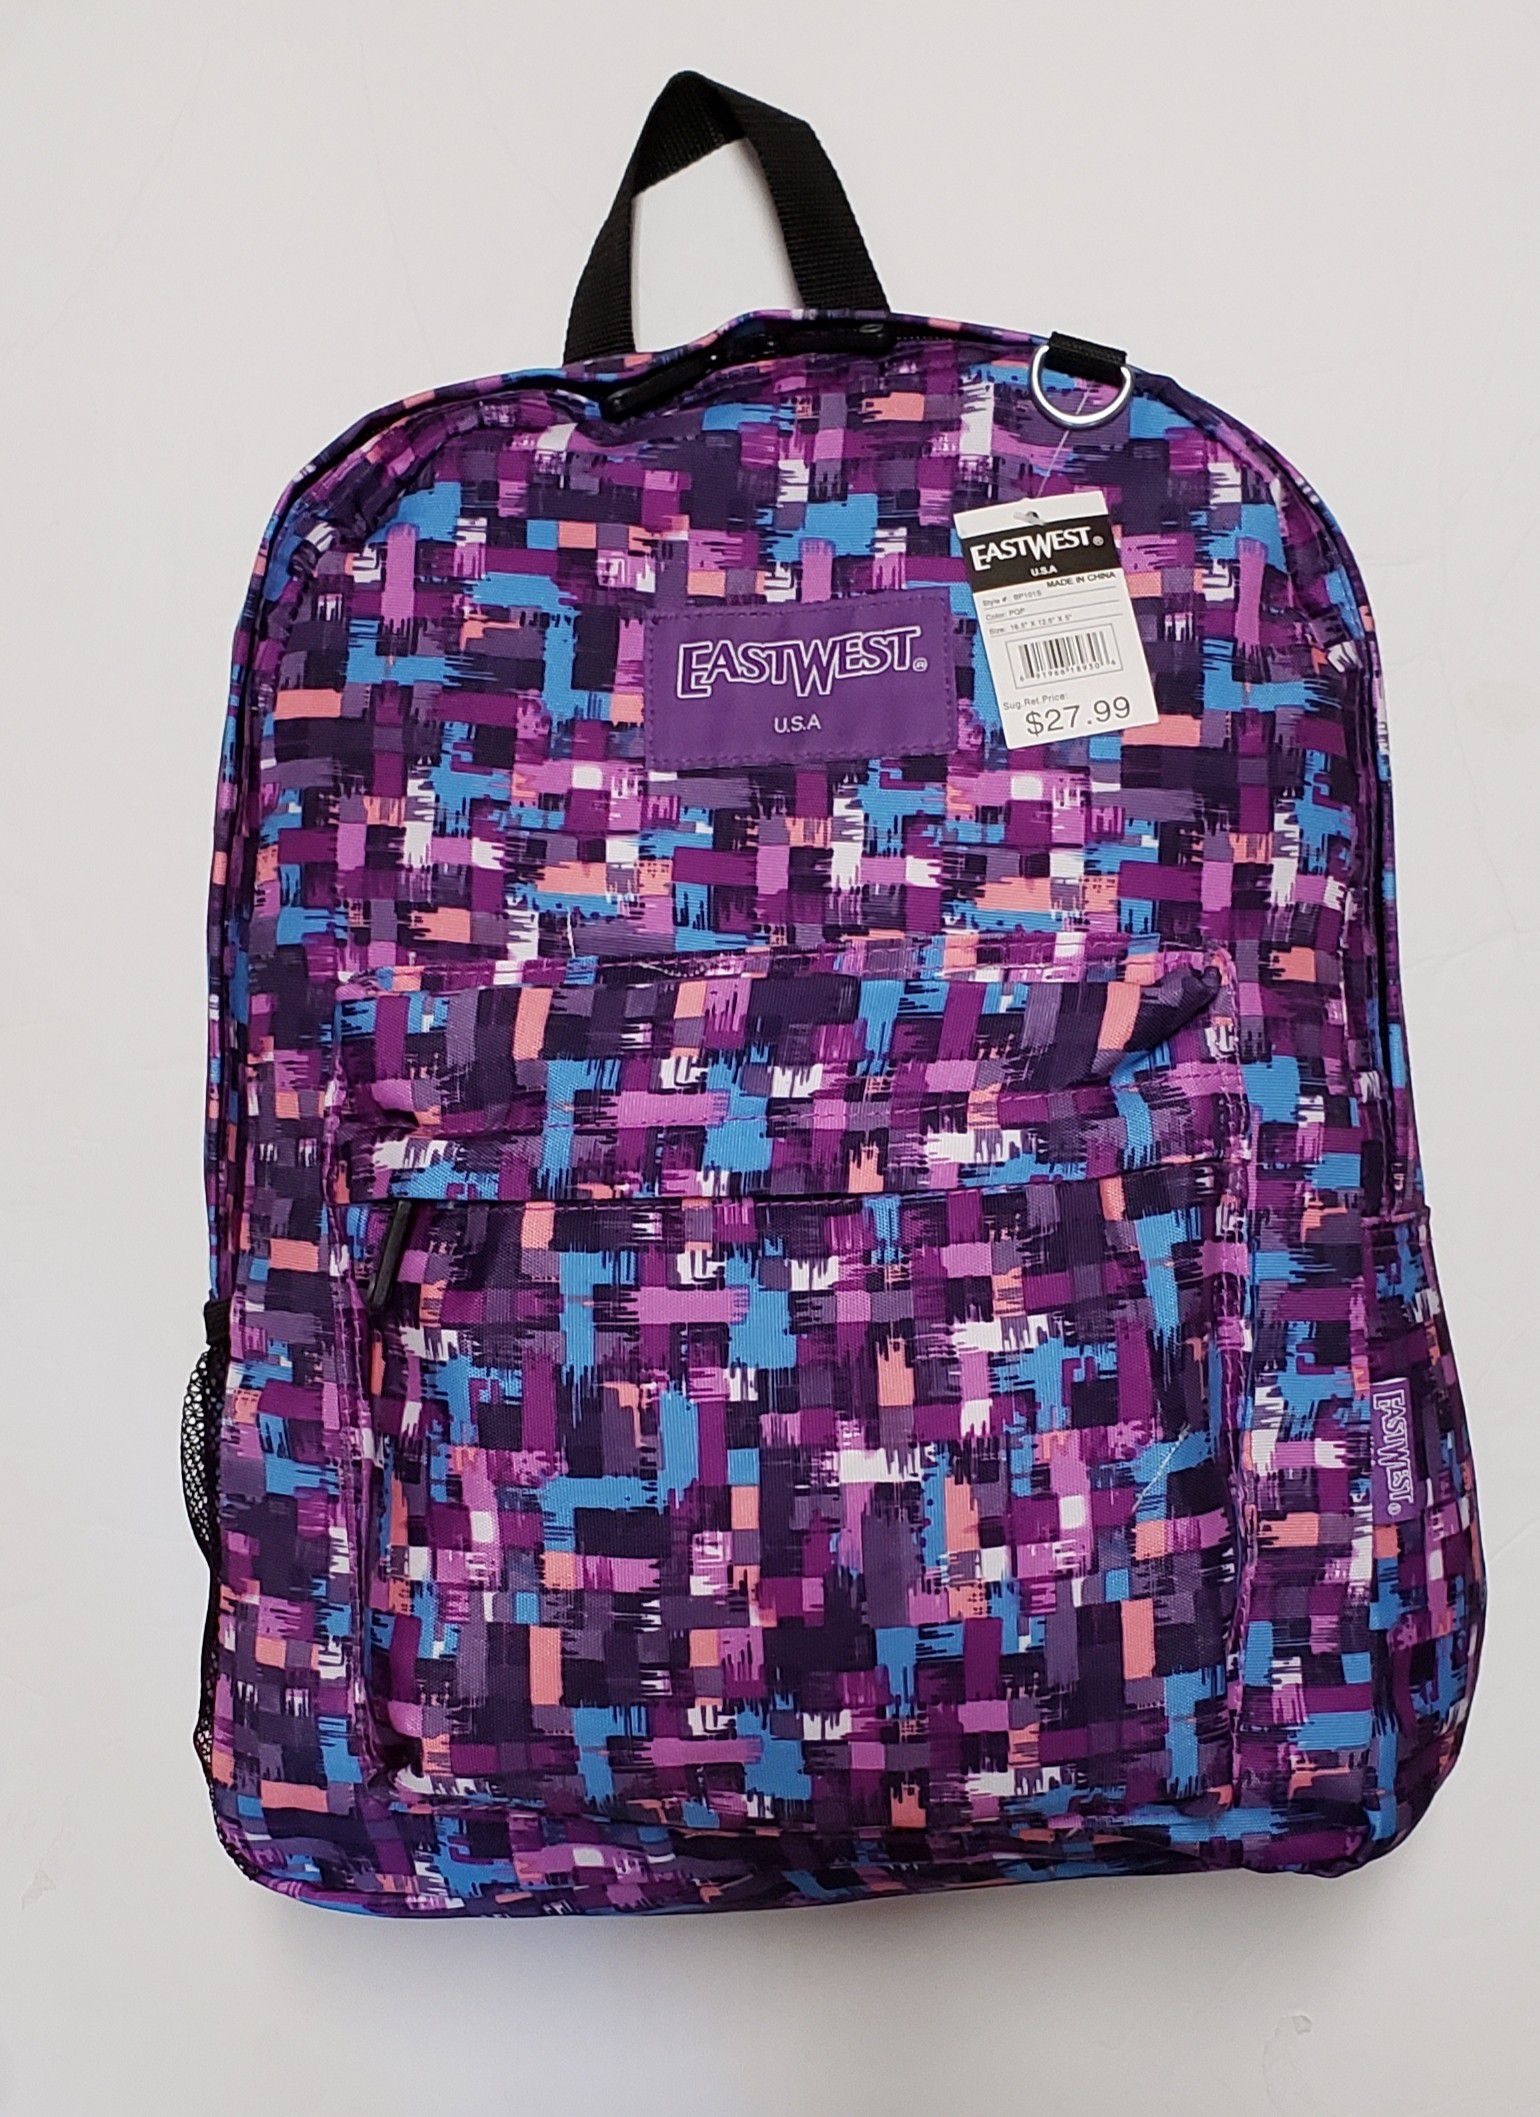 NEW! Purple Regular Size Backpack For School/Traveling/Work/Gym/Everyday Use $9